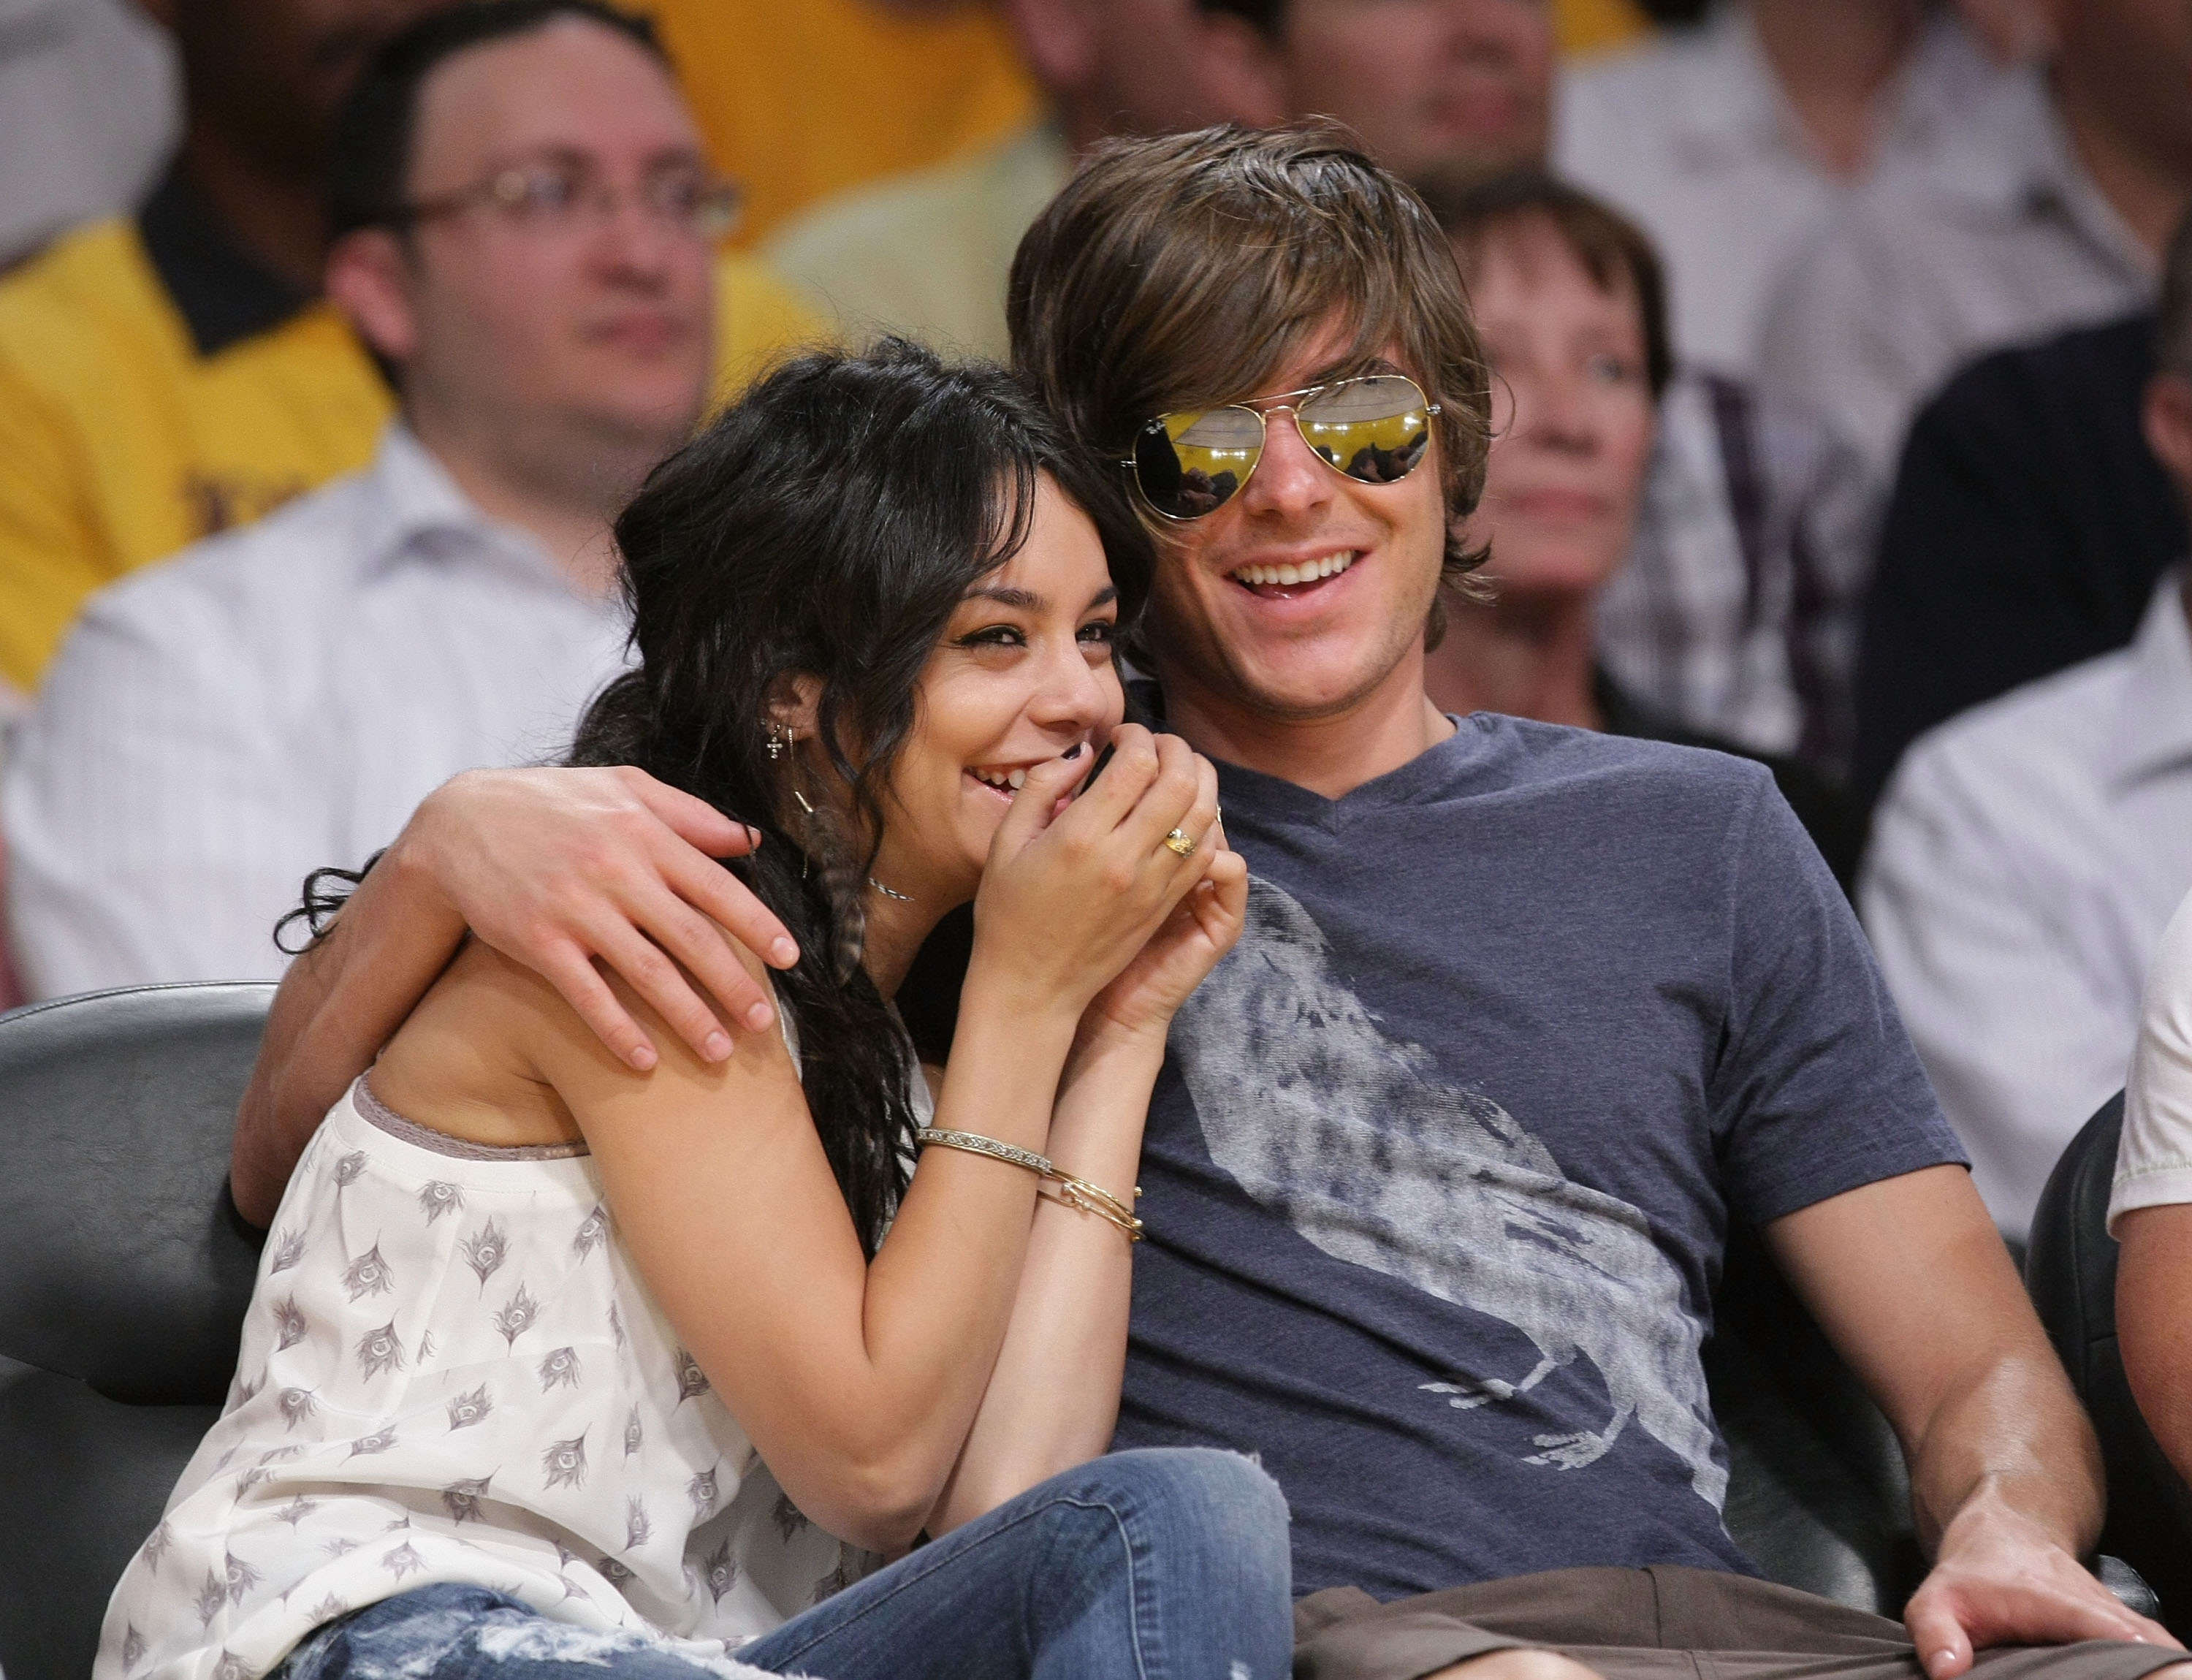 Vanessa Hudgens (L) and Zac Efron (R) attend the Los Angeles Lakers vs Utah Jazz at the Staples Center, on April 19, 2009, in Los Angeles, California. | Source: Getty Images